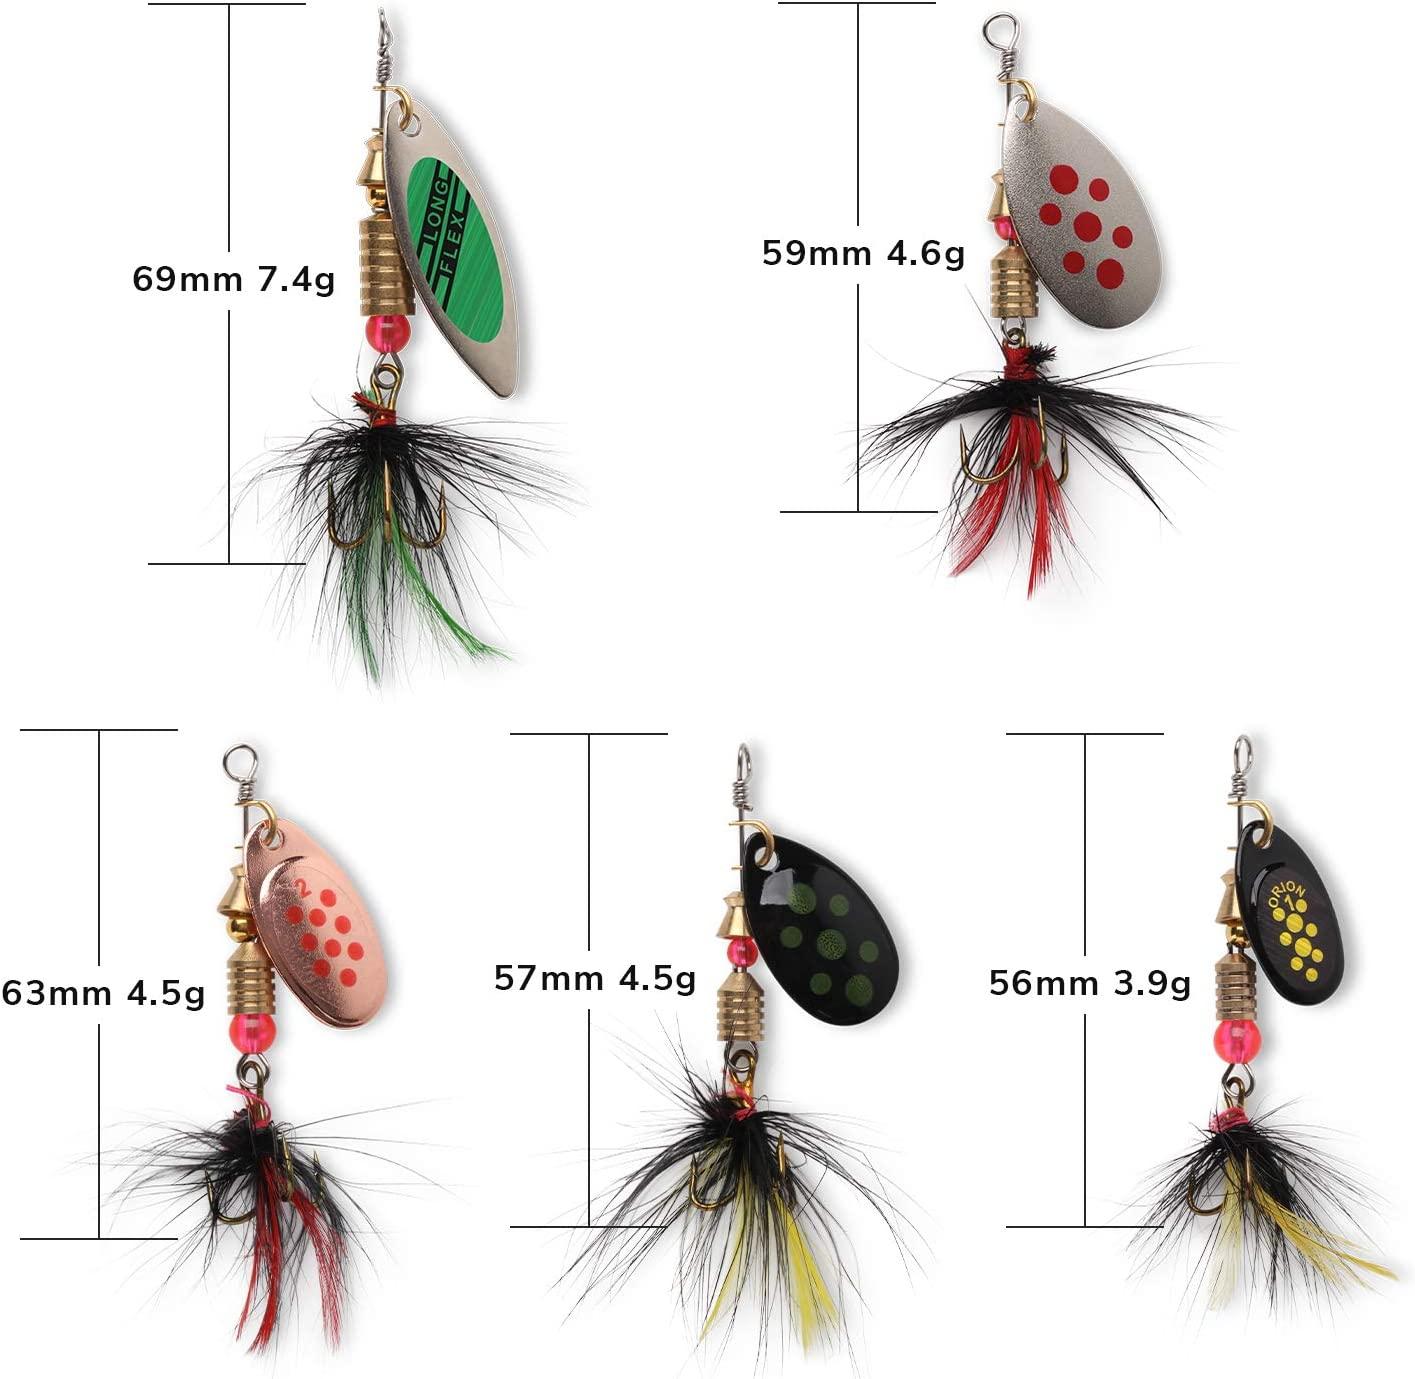 Fishing Lure Spinner Baits for Bass Fishing Trout Salmon Hard